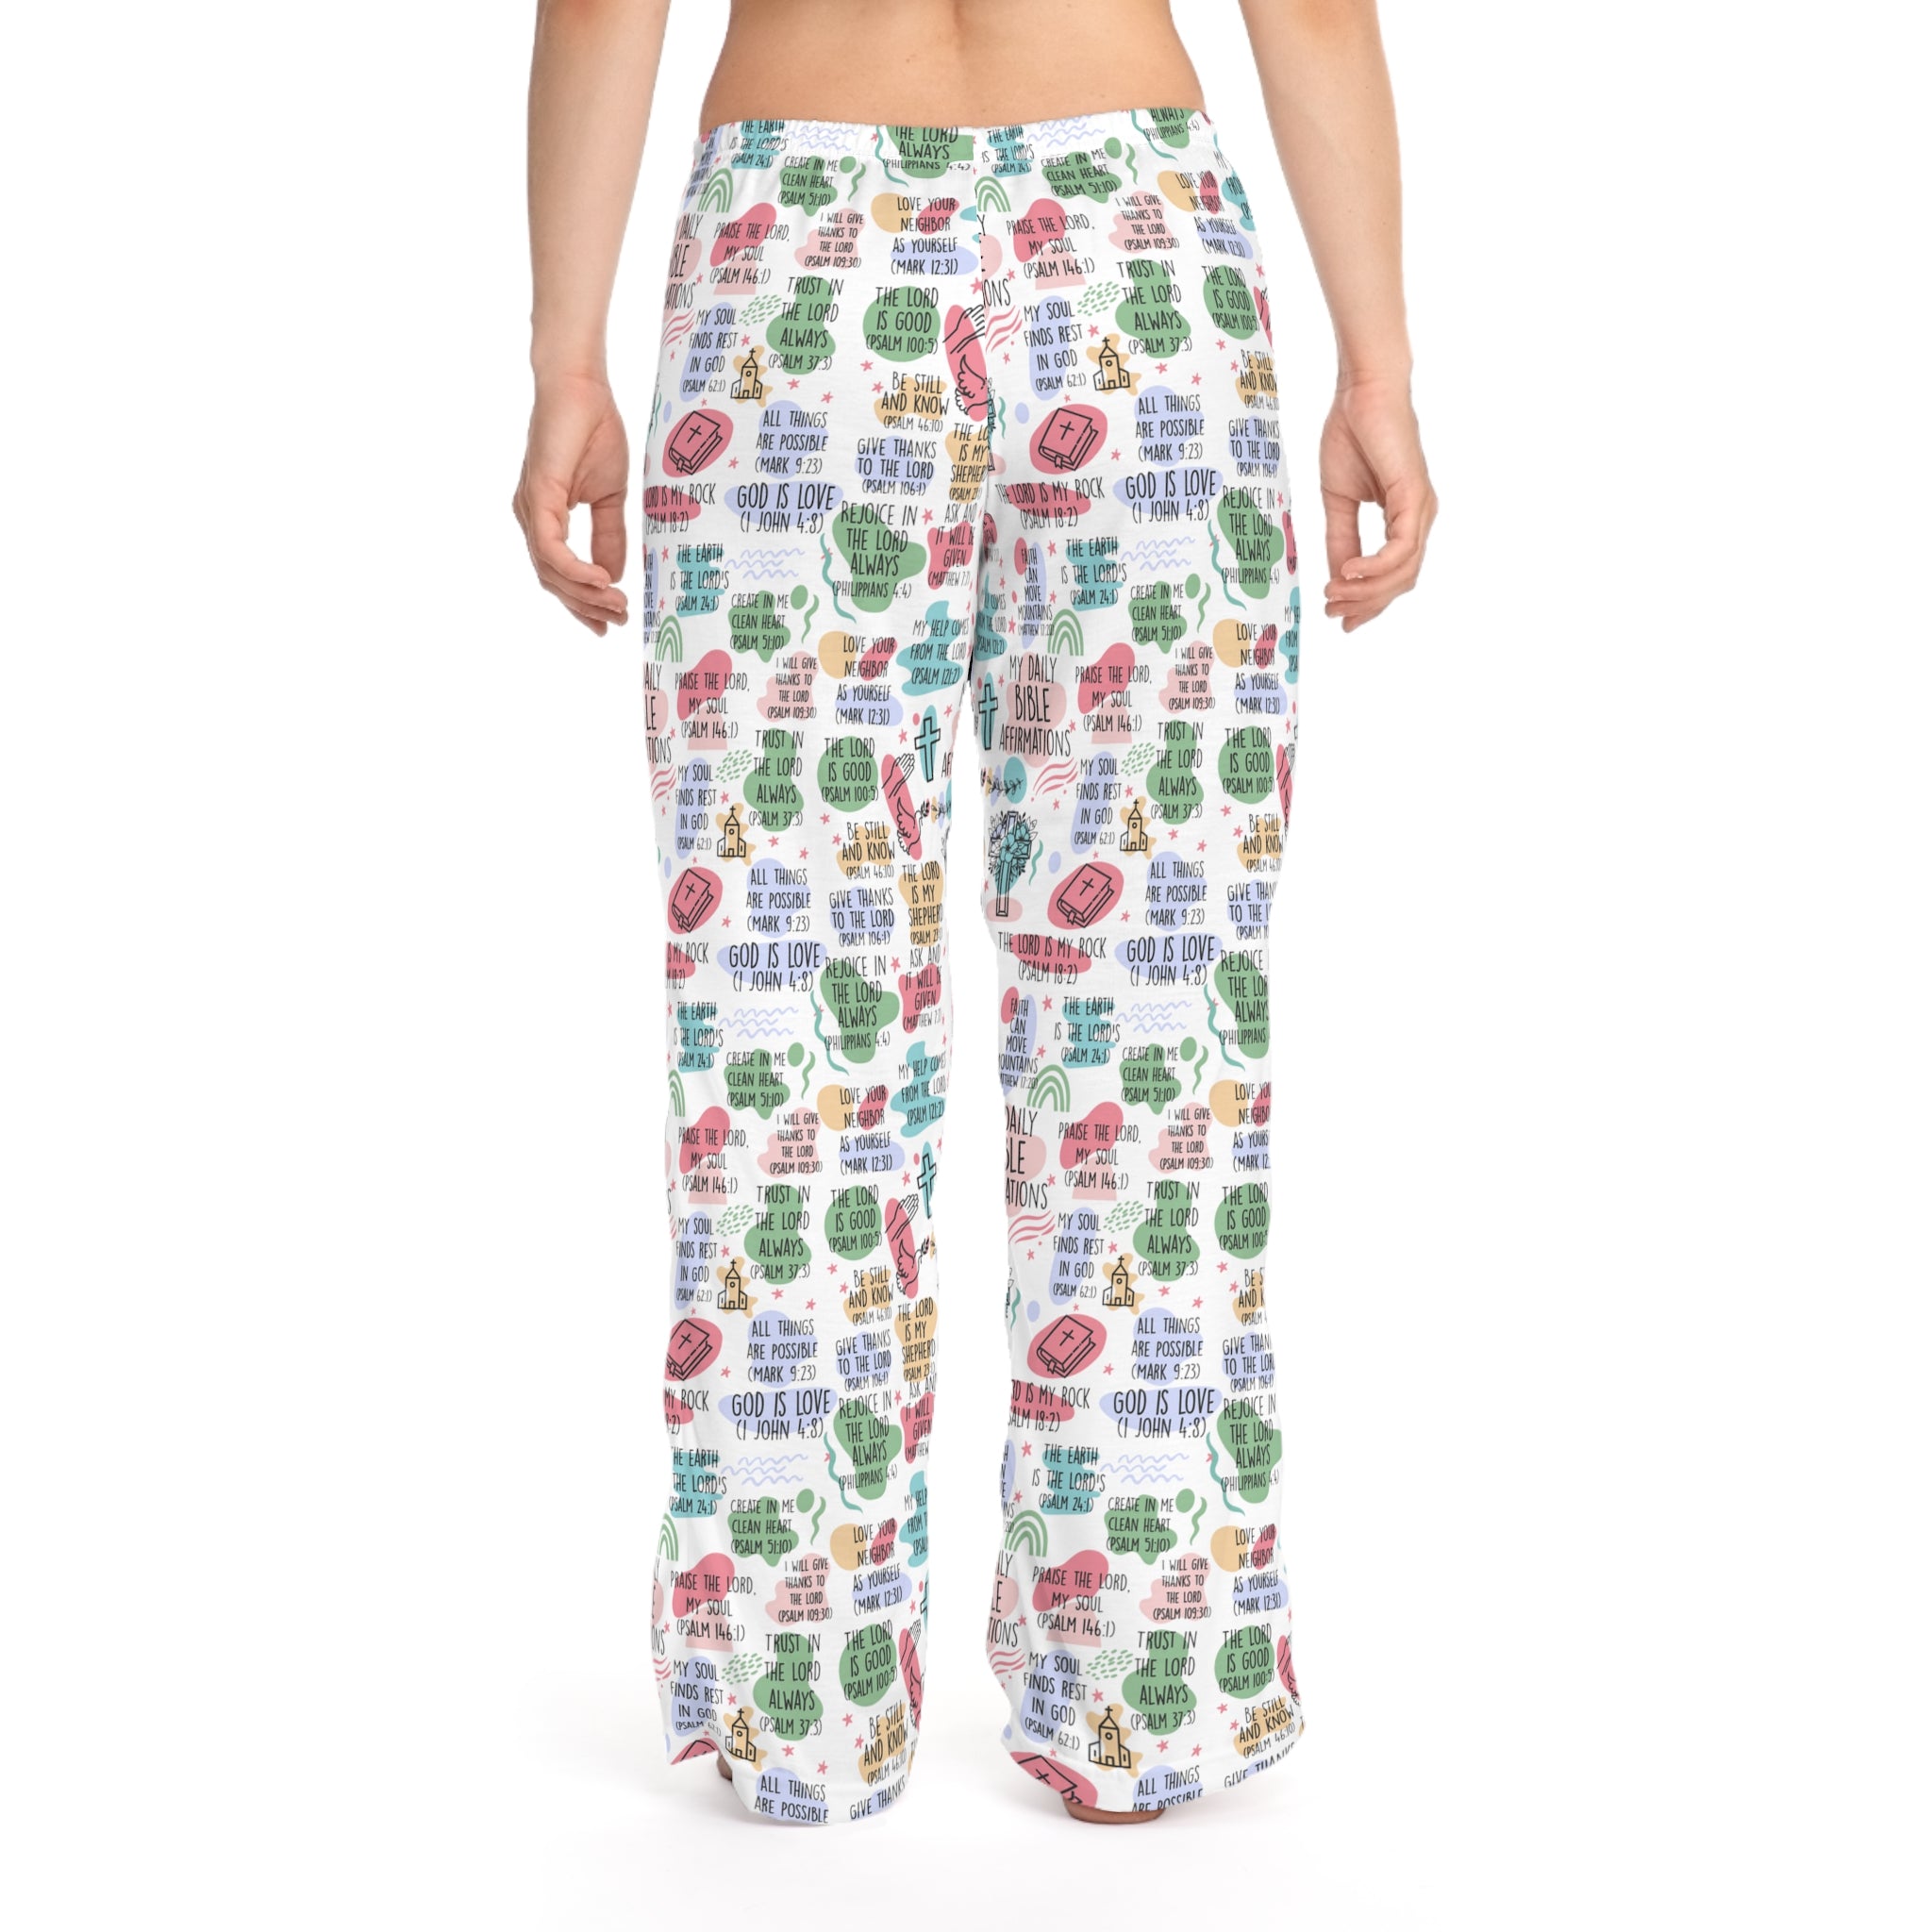 Daily Bible Affirmations Women's Lounge / Pajama Pants - Matching Pajama Set and Indoor Slippers Available Size: XS Color: White stitching Jesus Passion Apparel